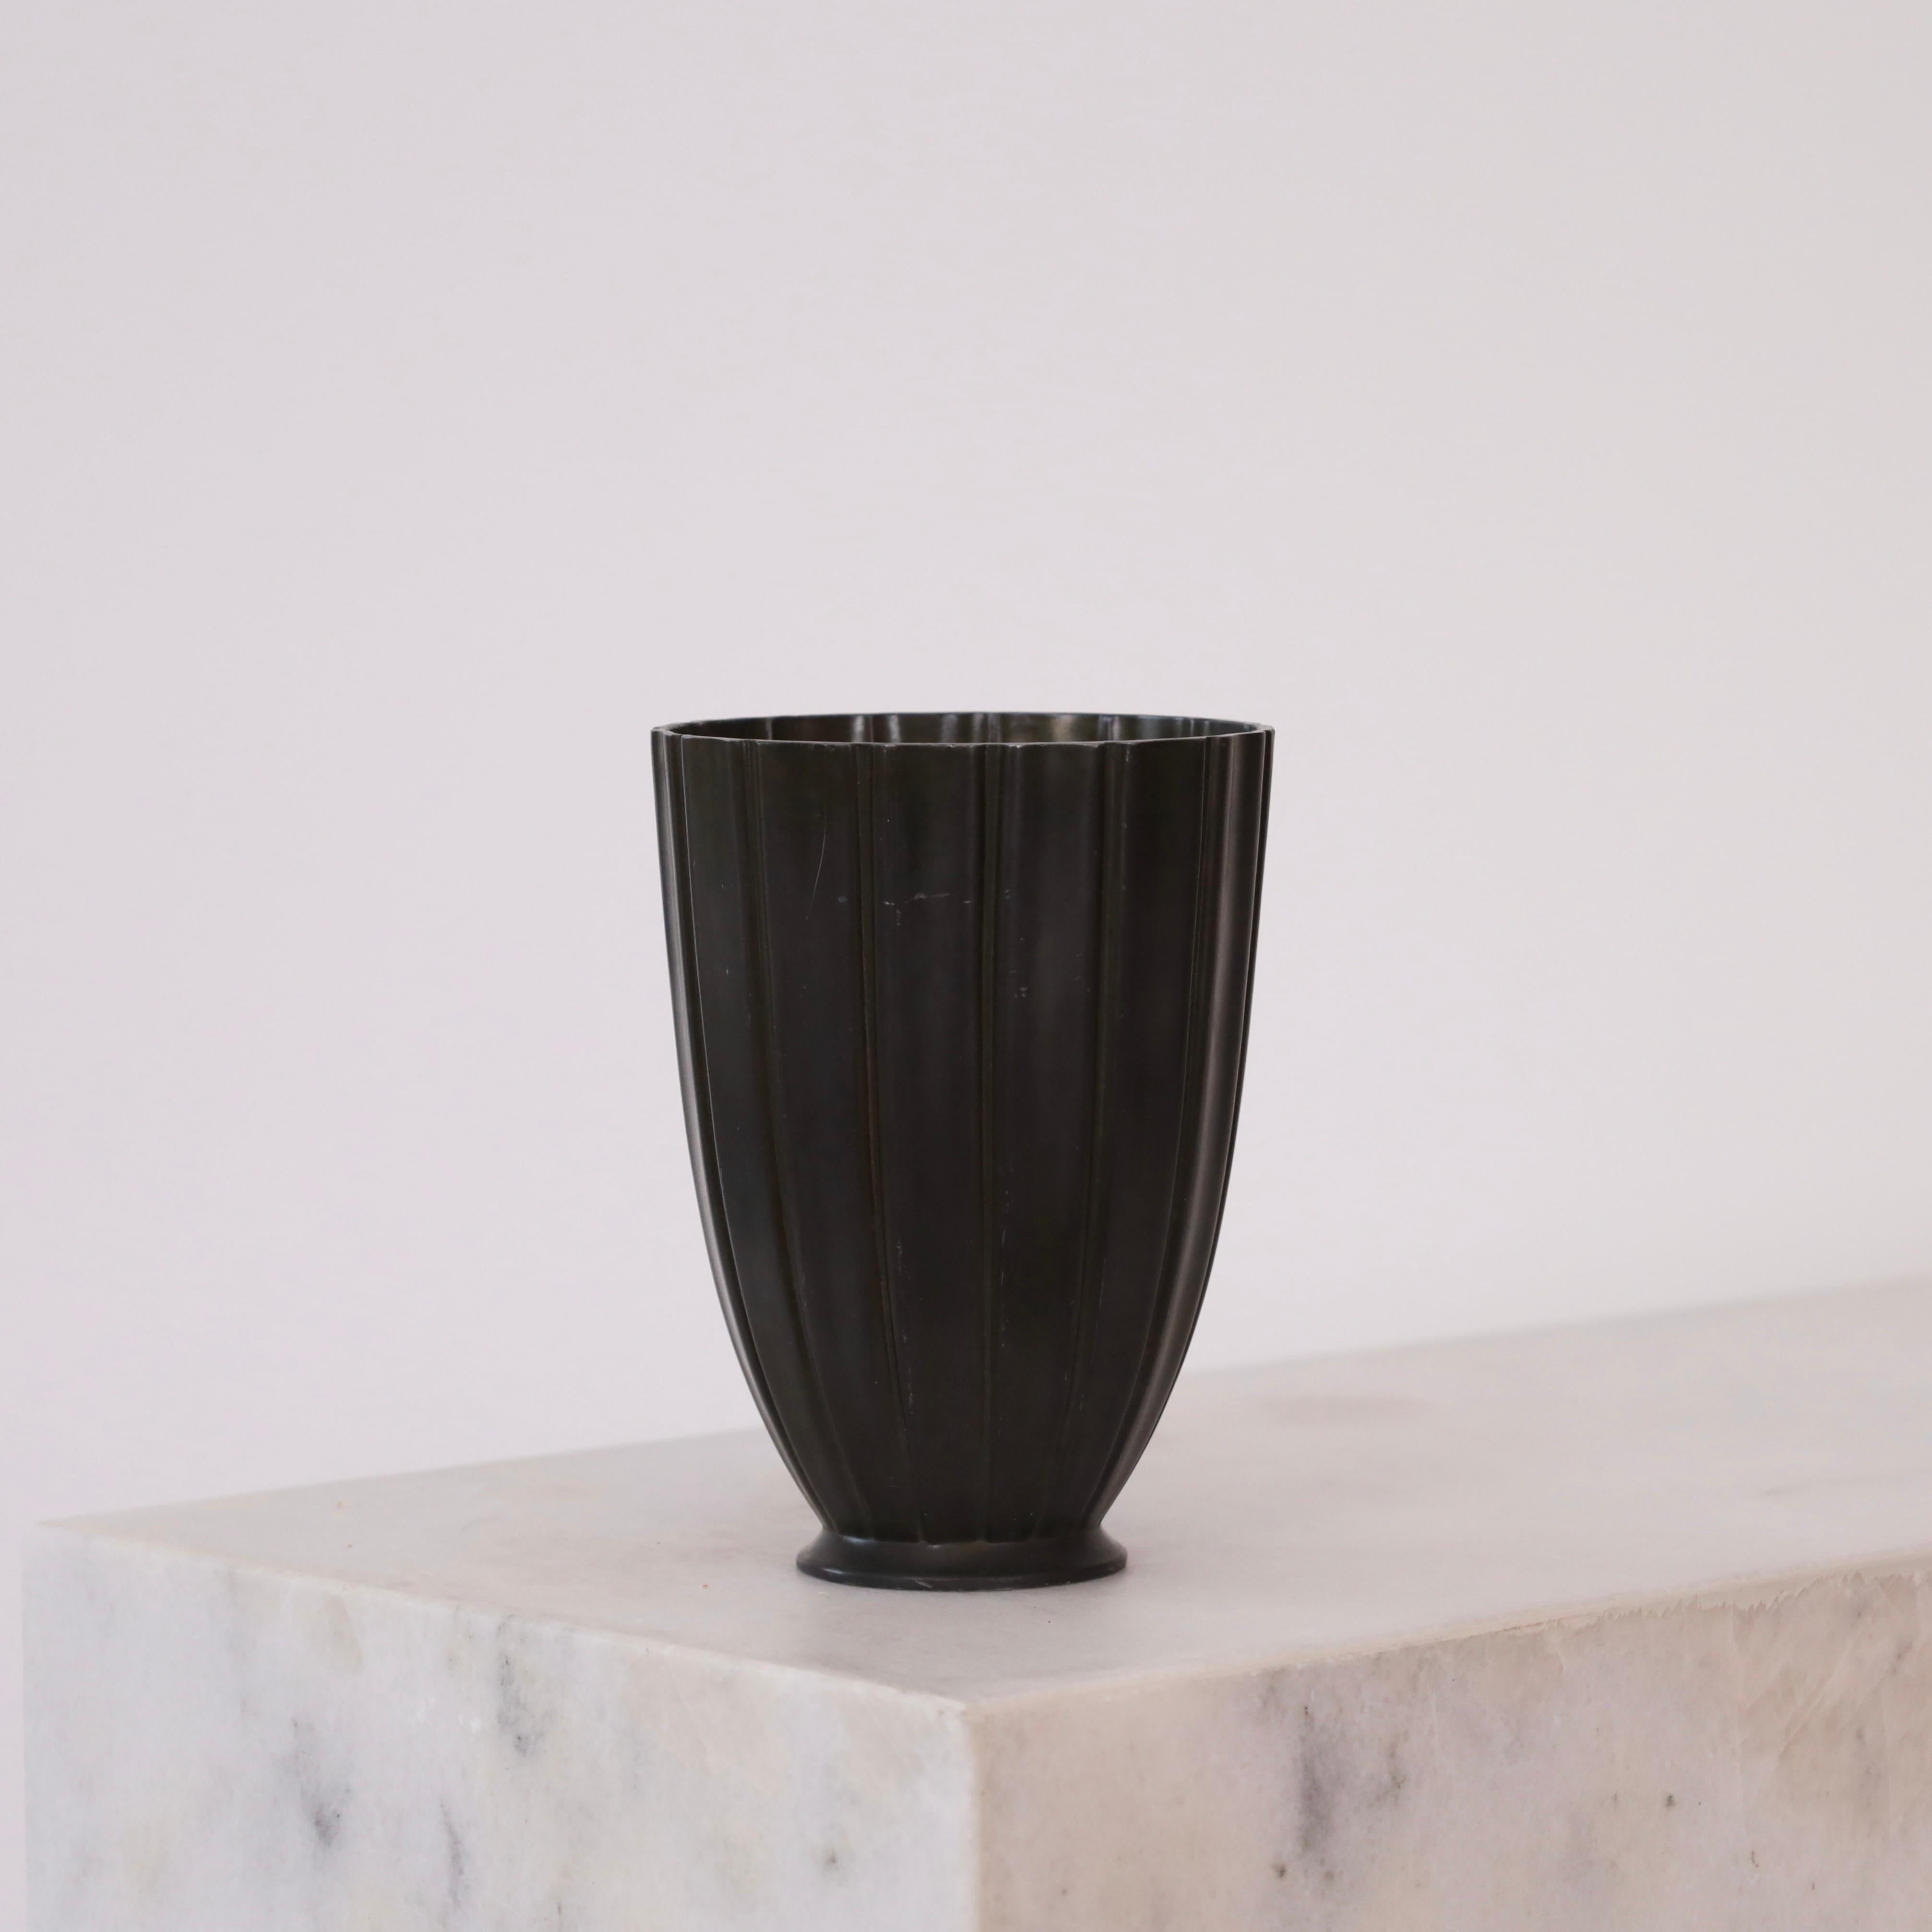 A metal vase with vertical lines designed by Just Andersen in the 1942. A fine piece for a beautiful spot.

* A metal vase with vertical lines on a small foot
* Designer: Just Andersen
* Model: D2363 (stamped 'Just 2363')
* Year: 1942
* Condition: